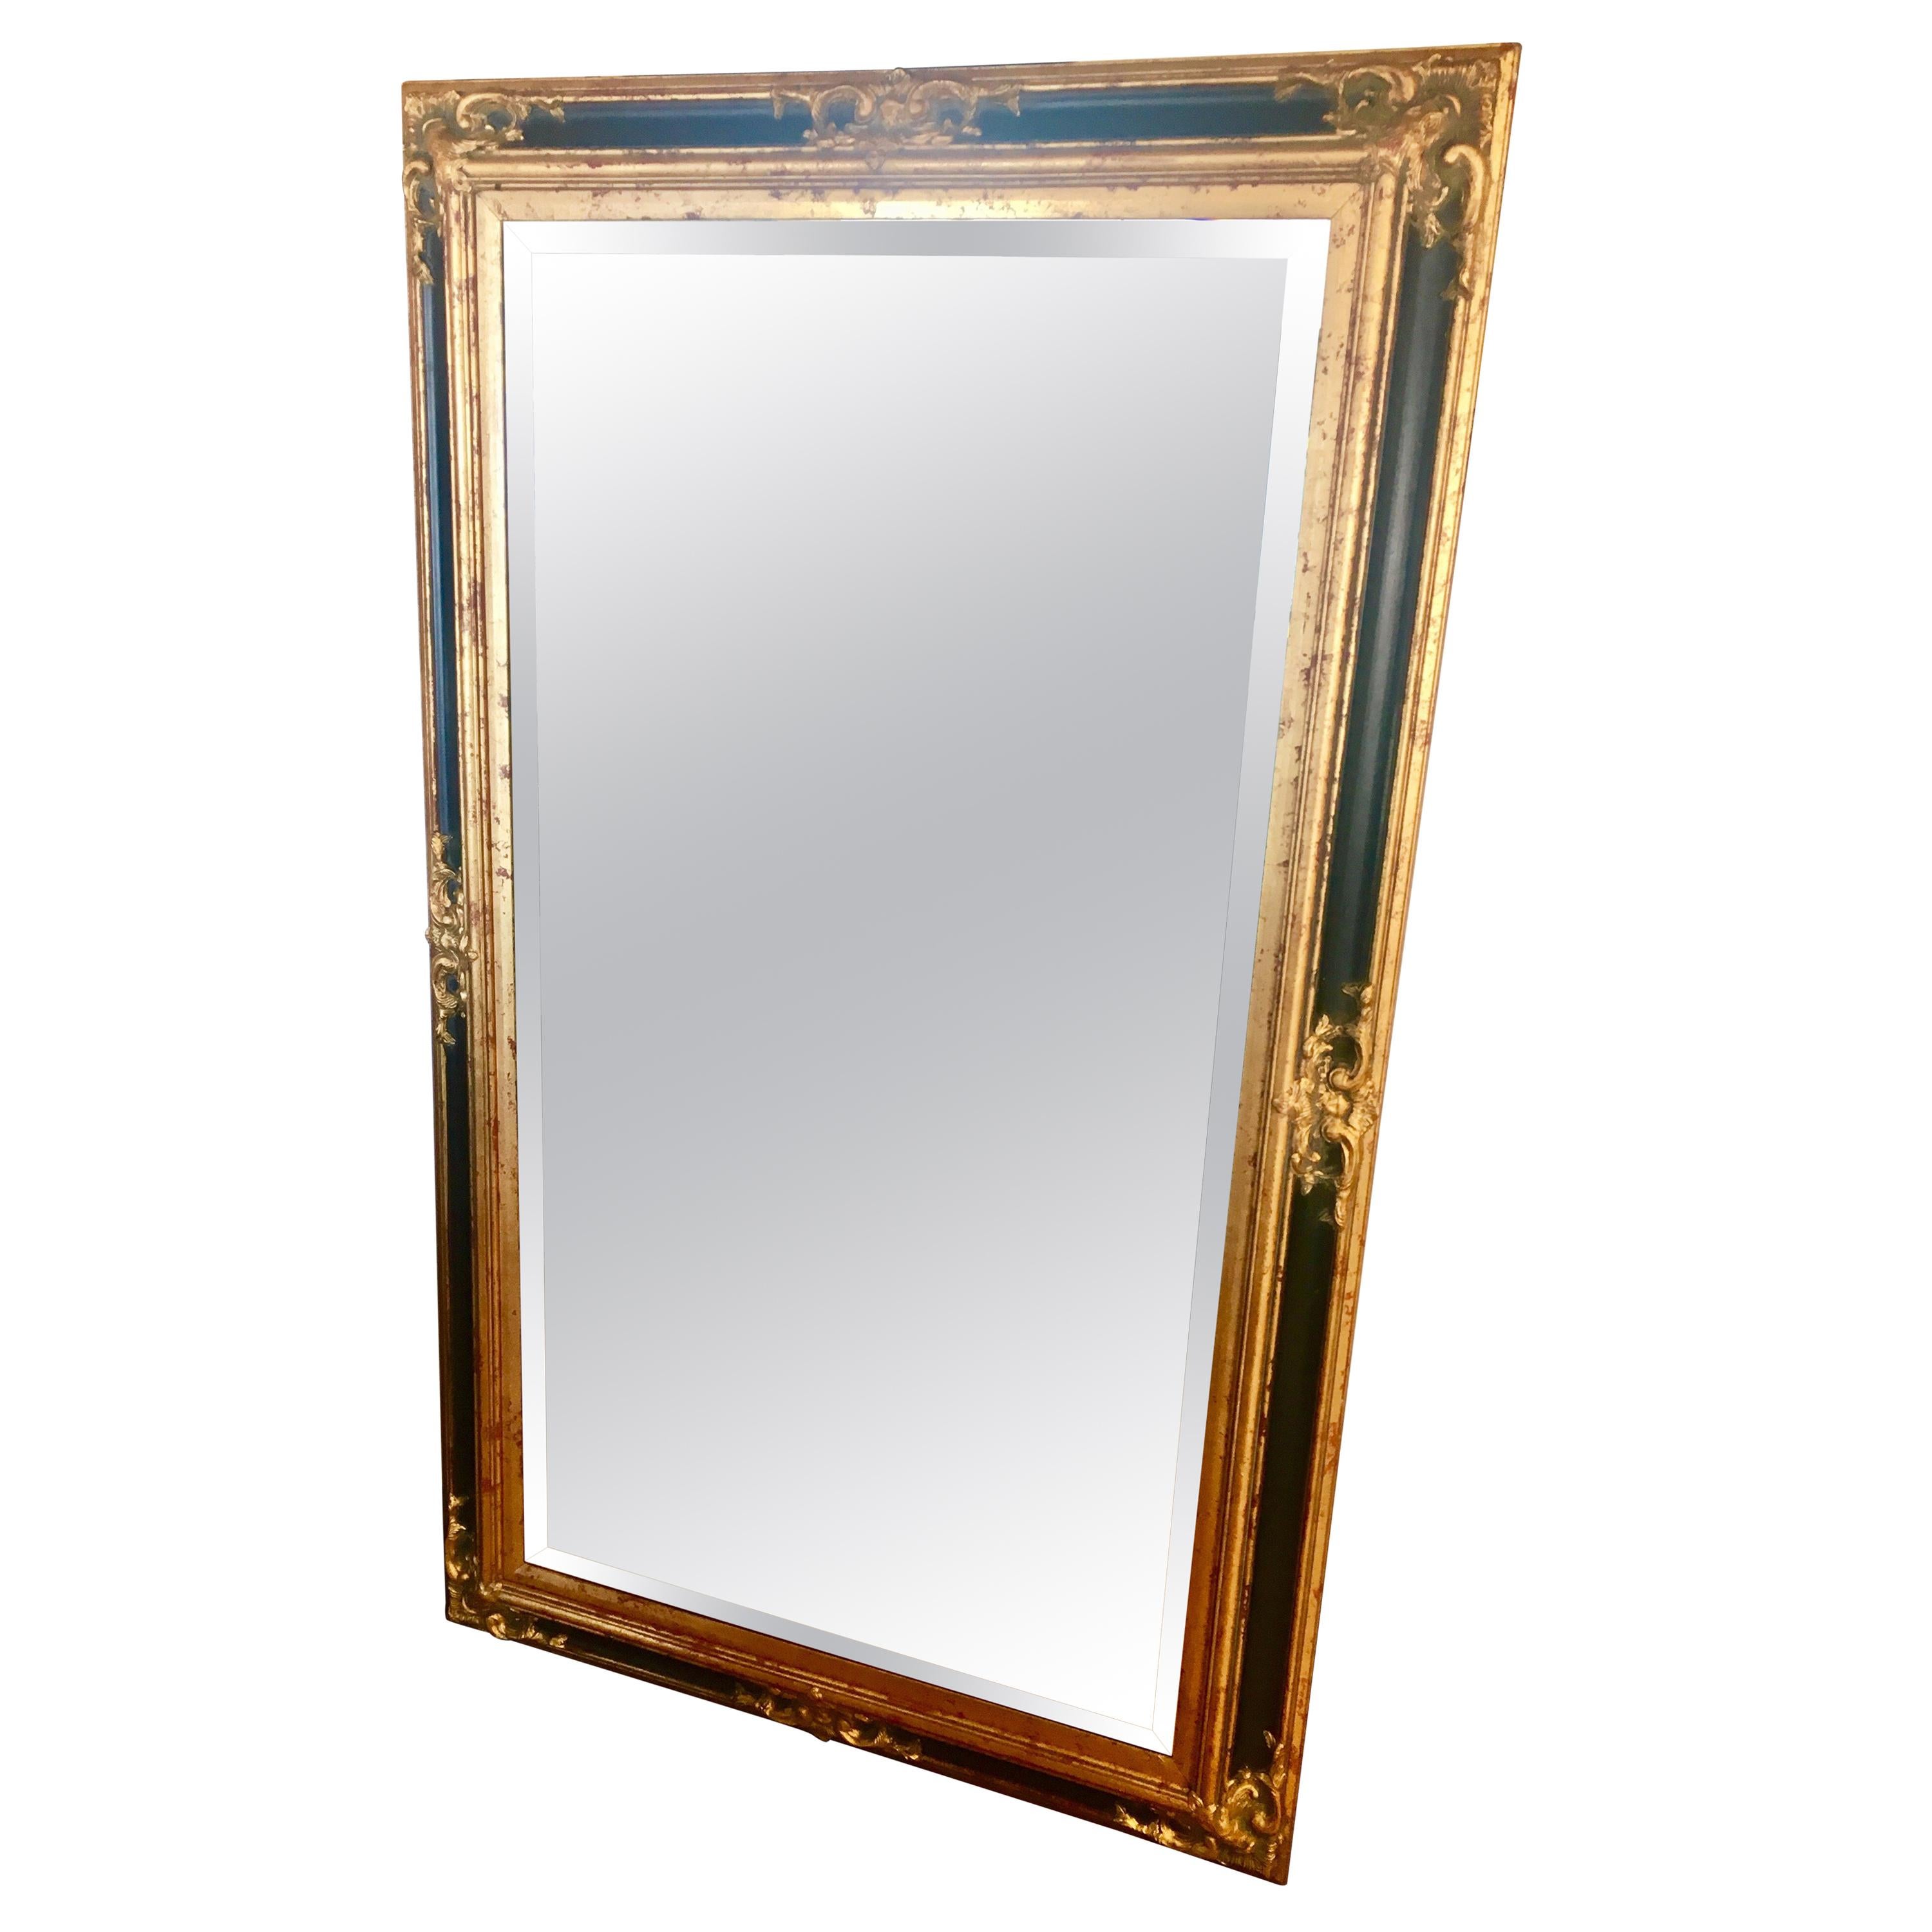 Monumental Large Full Length Neoclassical Beveled Floor Mirror Black and Gold